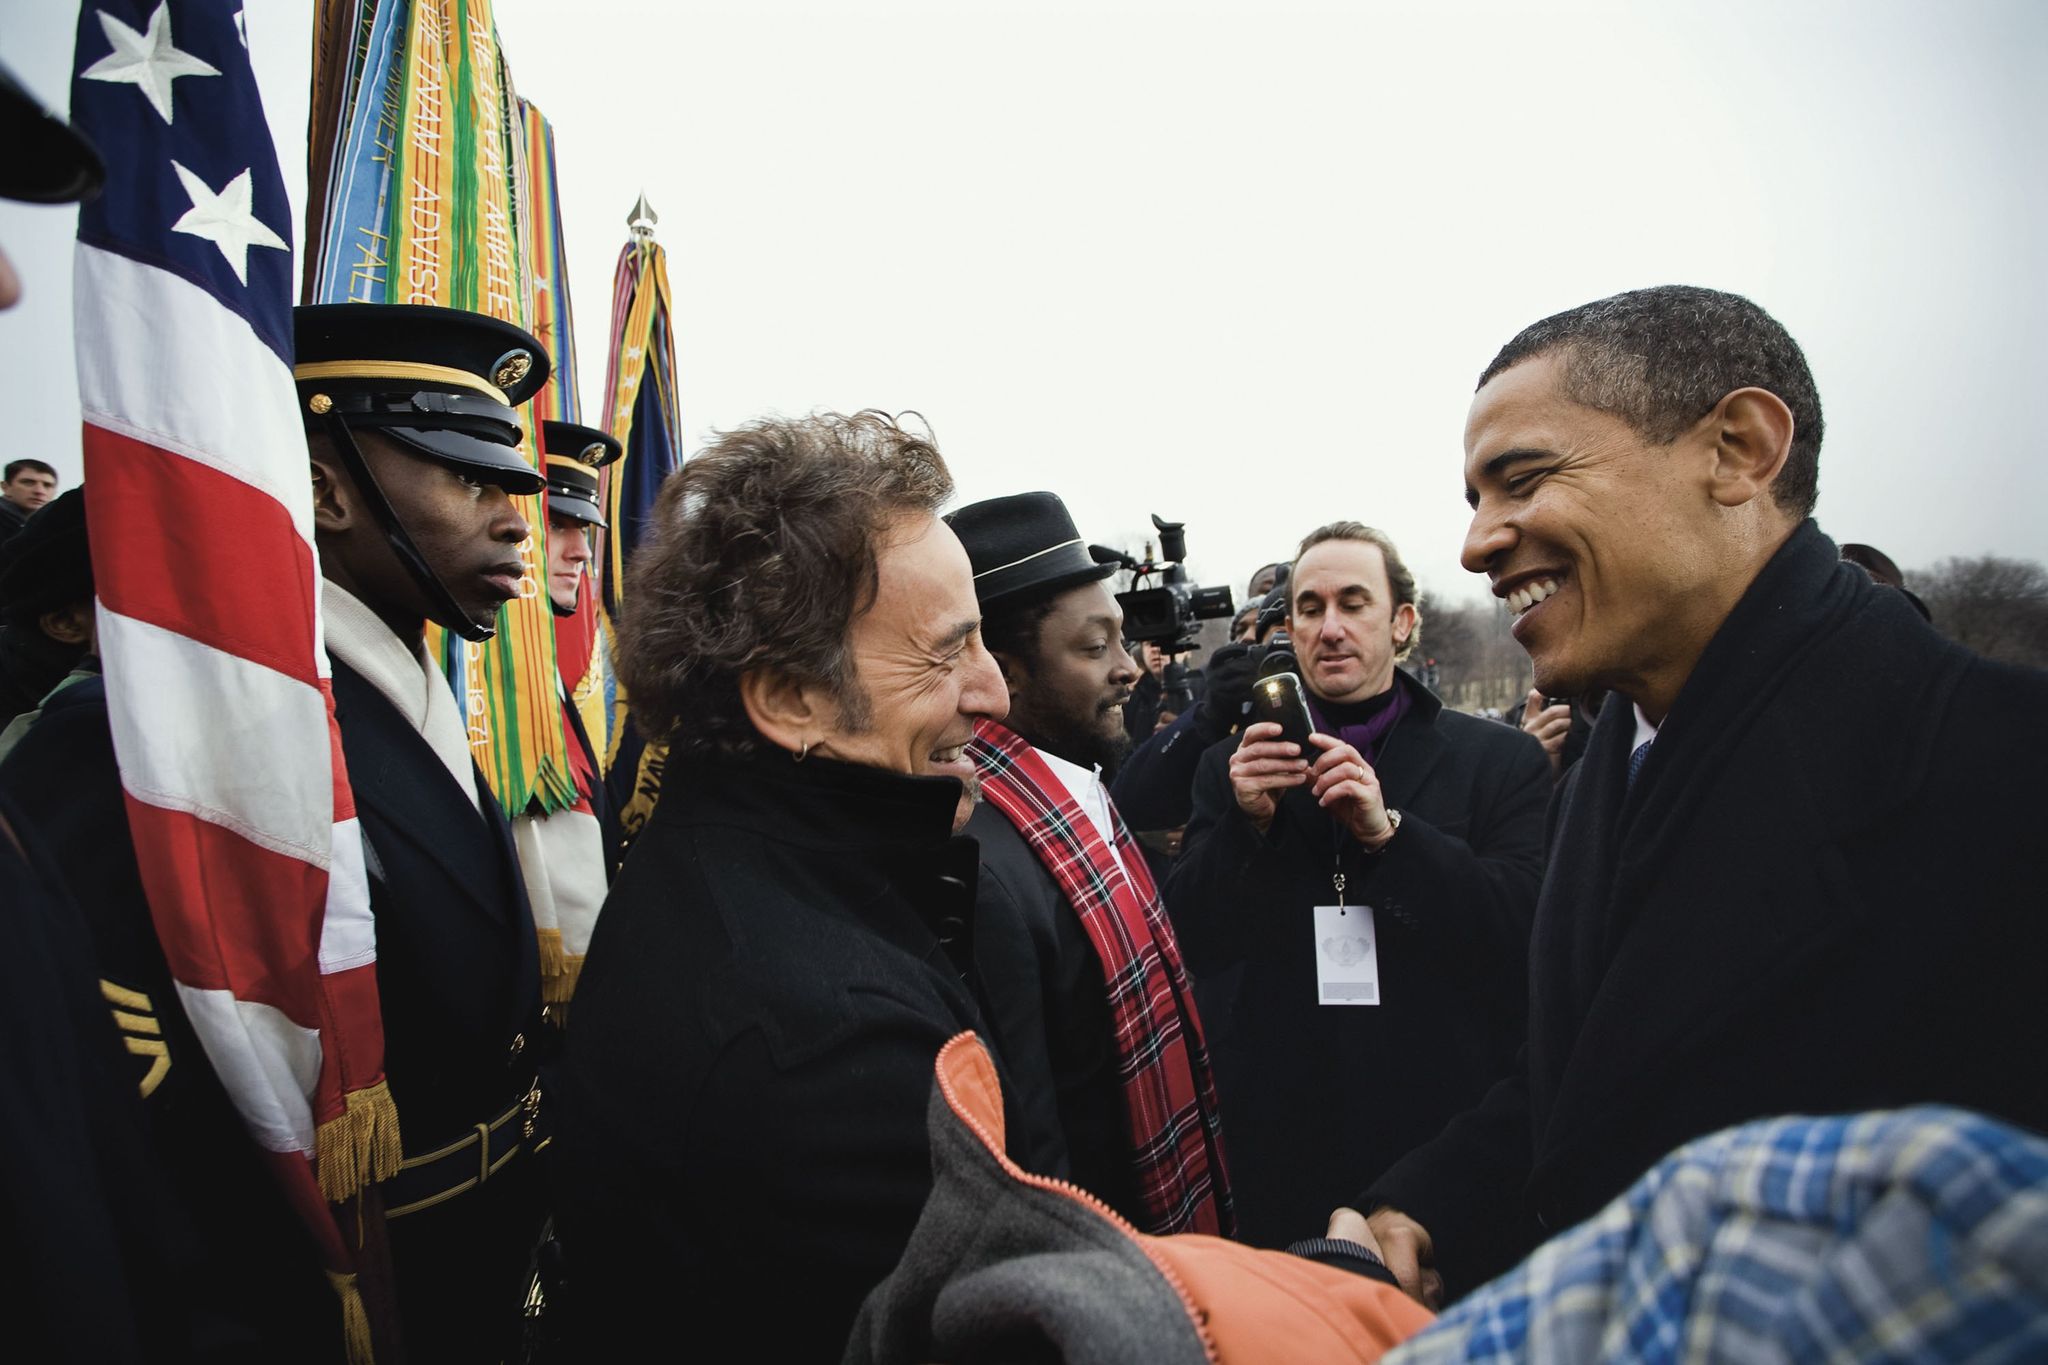 washington   january 18  president elect barack obama shakes hands with bruce springsteen after the we are one the obama inaugural celebration at the lincoln memorial on january 18, 2009 in washington, dc  photo by david hume kennerlygetty images